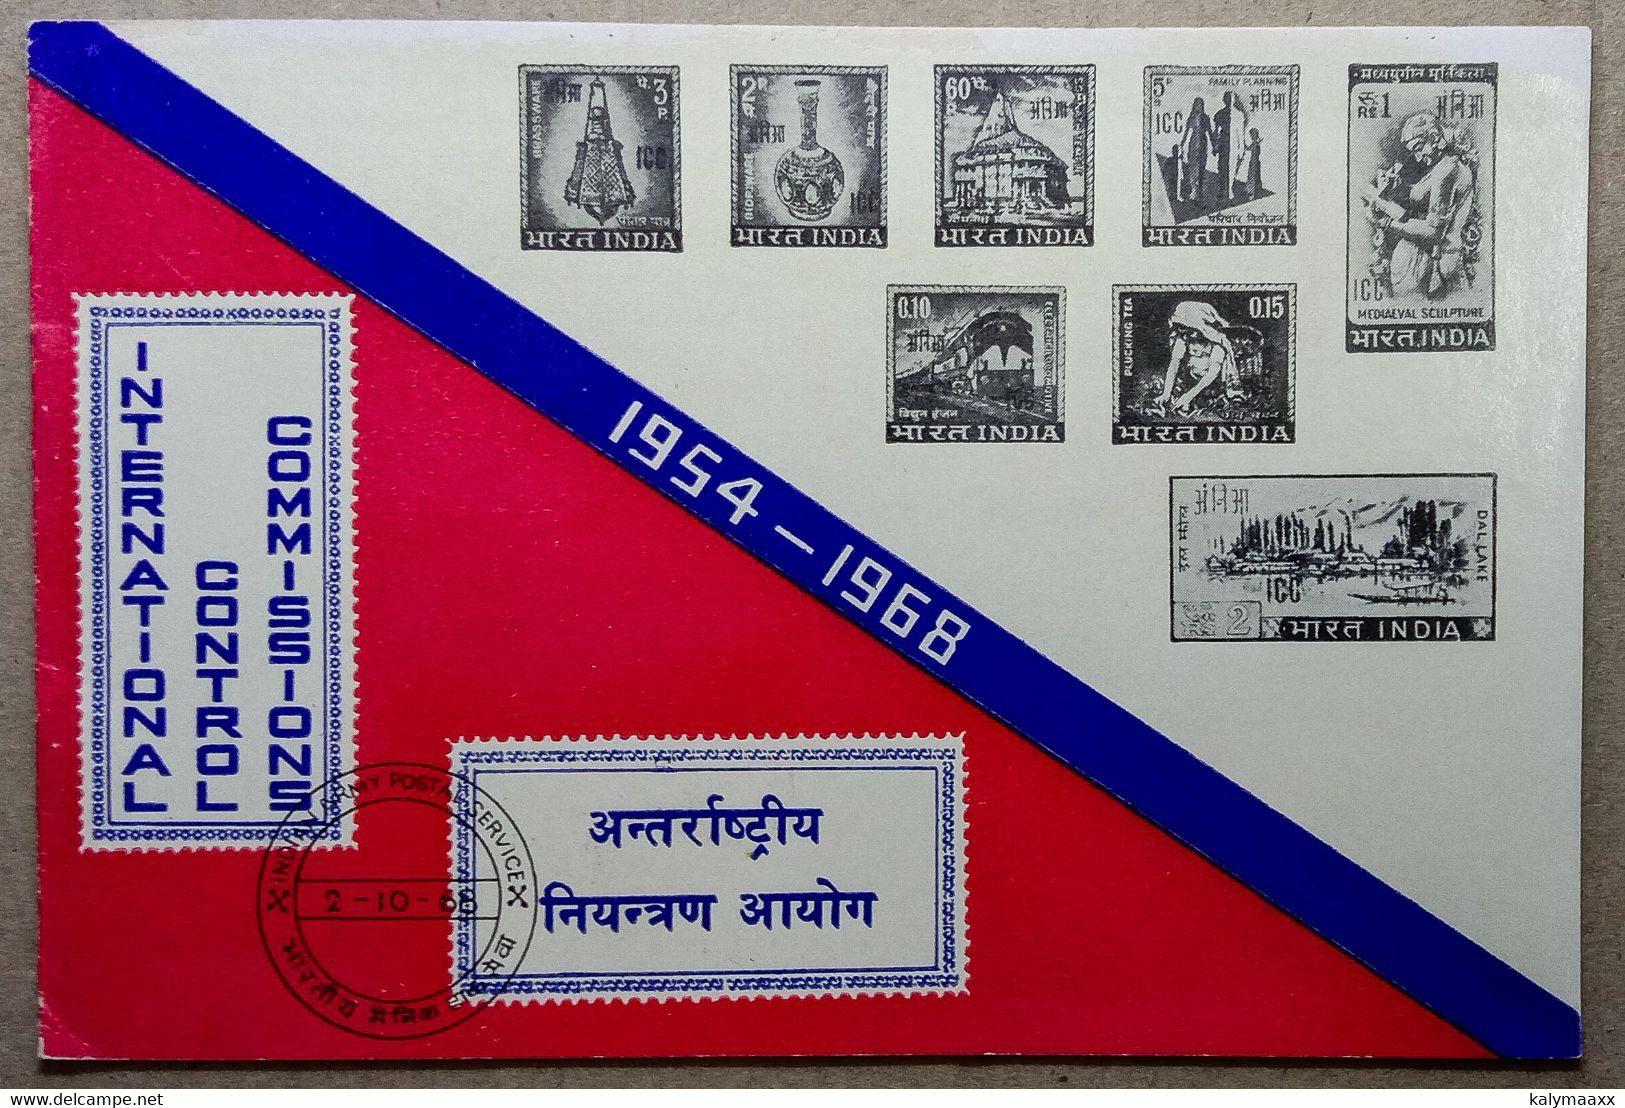 INDIA 1968 ICC OVERPRINTED COMPLETE SET OF 2 F.P.O CANCELLED COVERS & INFORMATION BROCHURE, VIETNAM, LAOS, CAMBODIA - Militaire Vrijstelling Van Portkosten